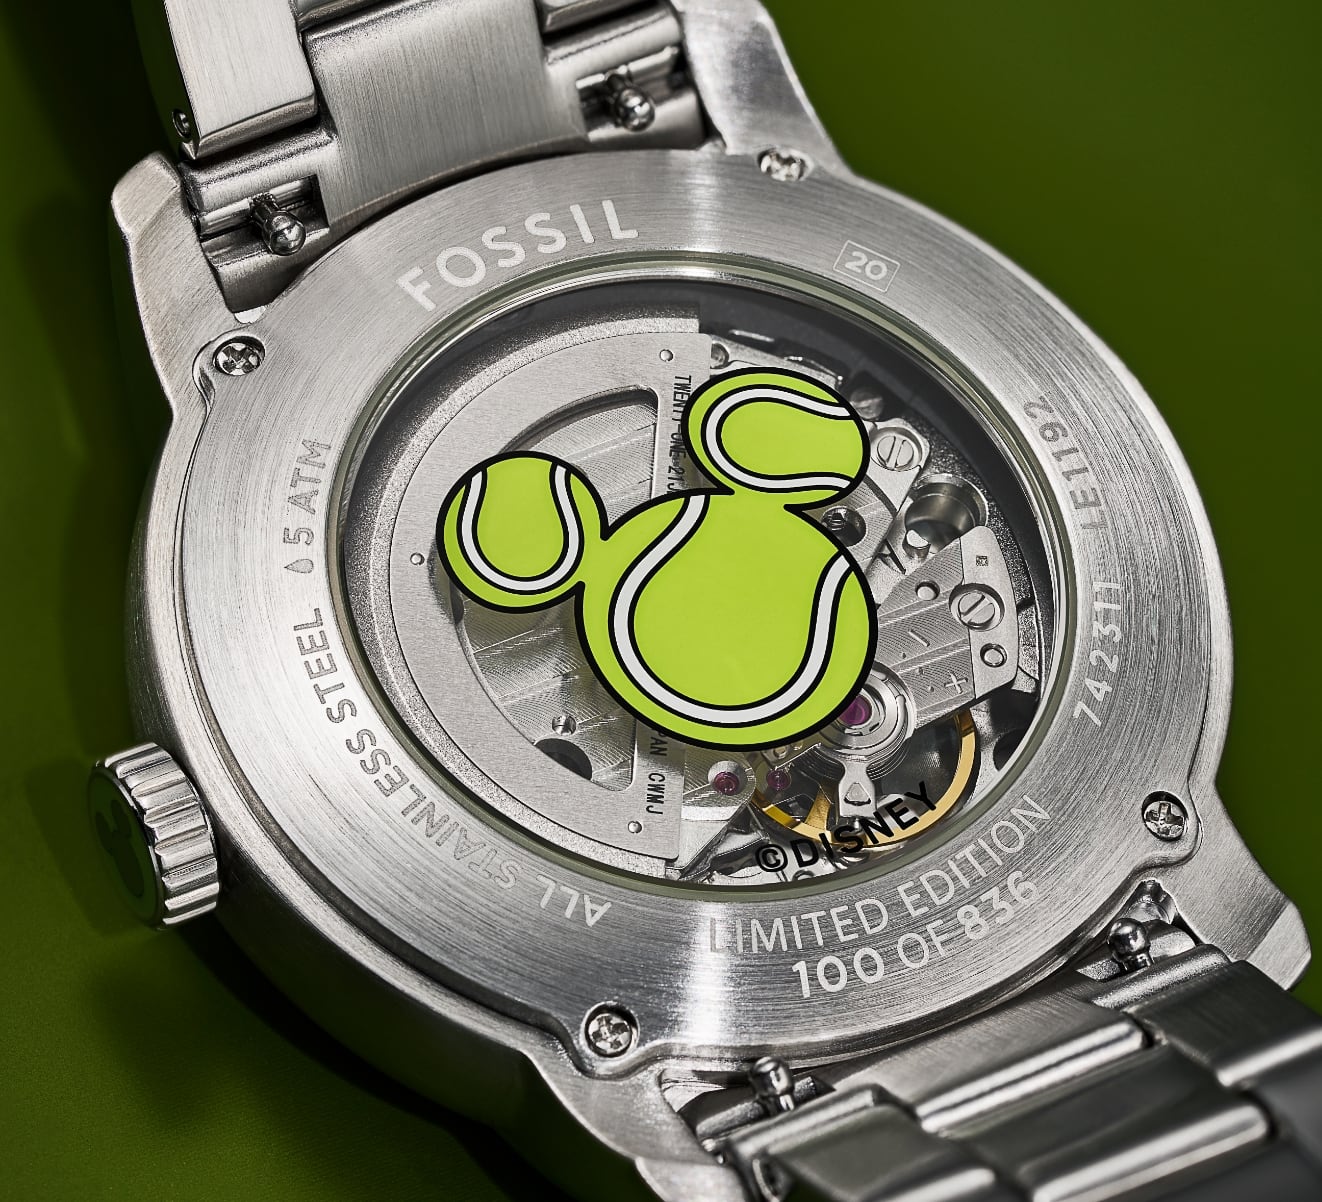 A GIF of two images showing the watch's custom caseback and crown, both featuring a tennis ball-inspired silhouette of Disney's Mickey Mouse.